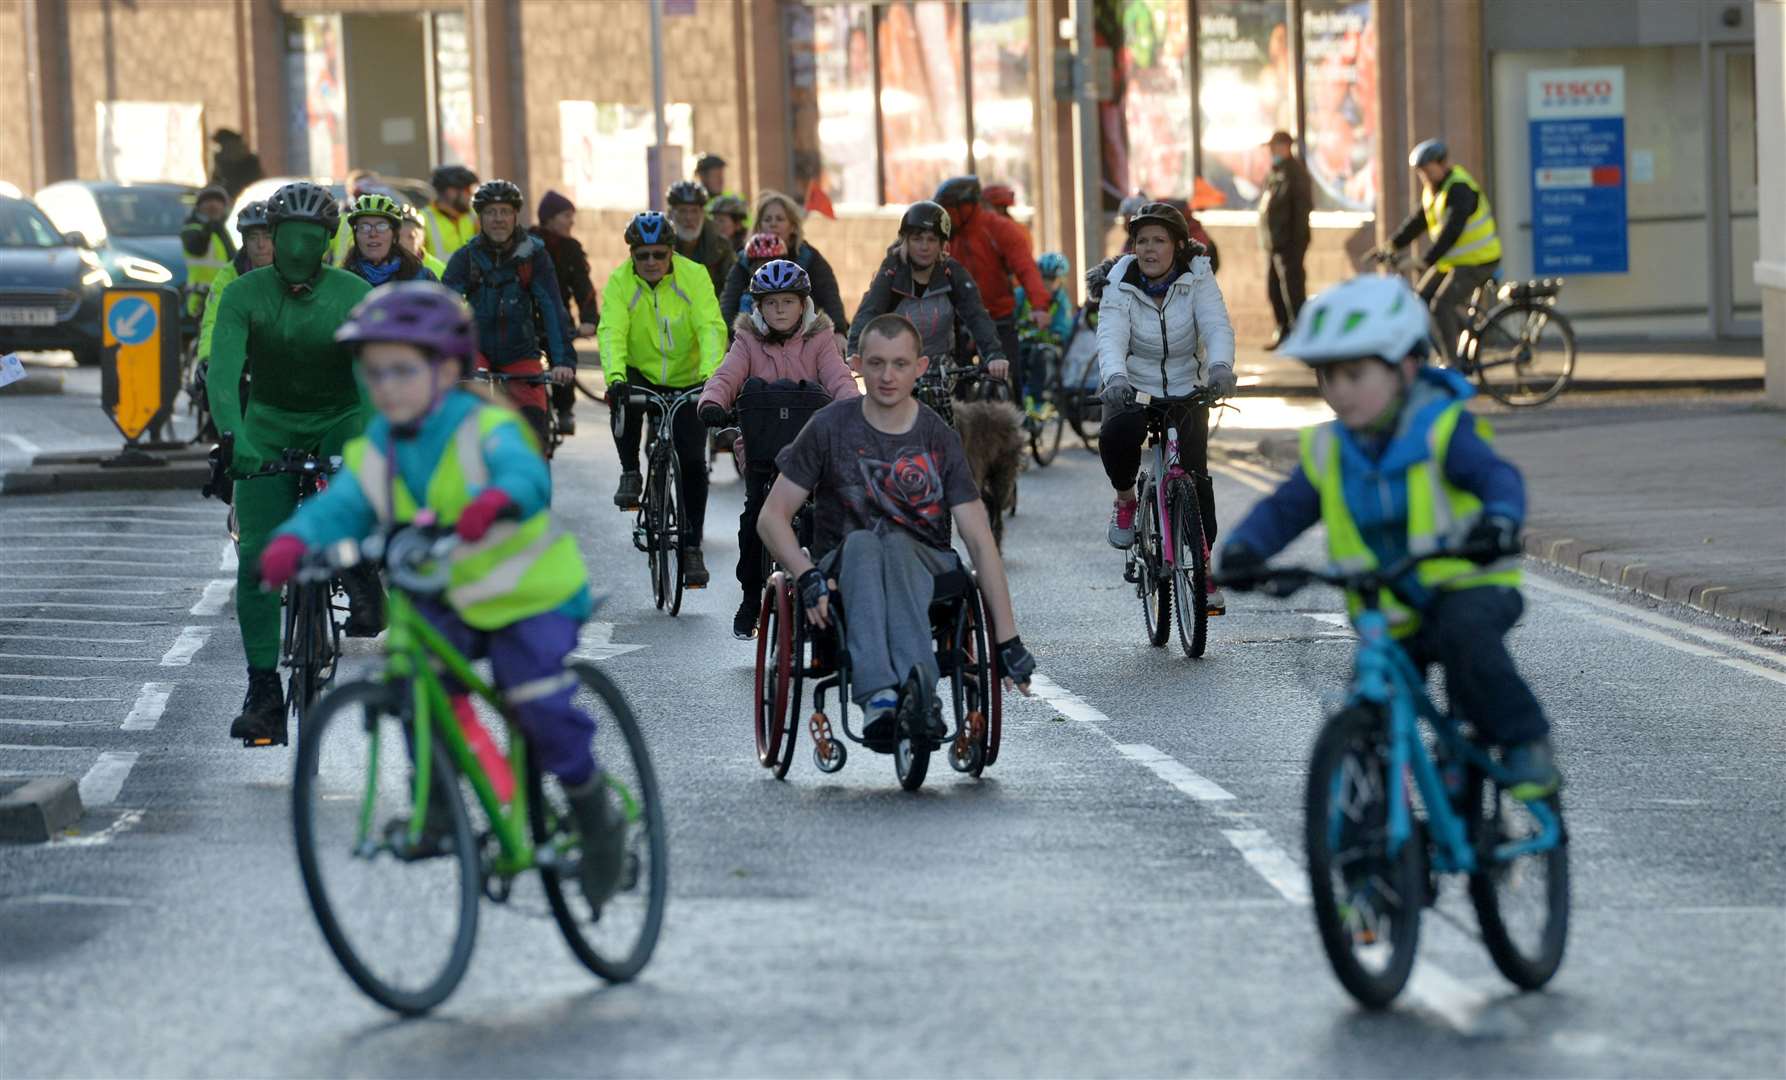 A Kidical Mass cycle recently took place in Inverness.